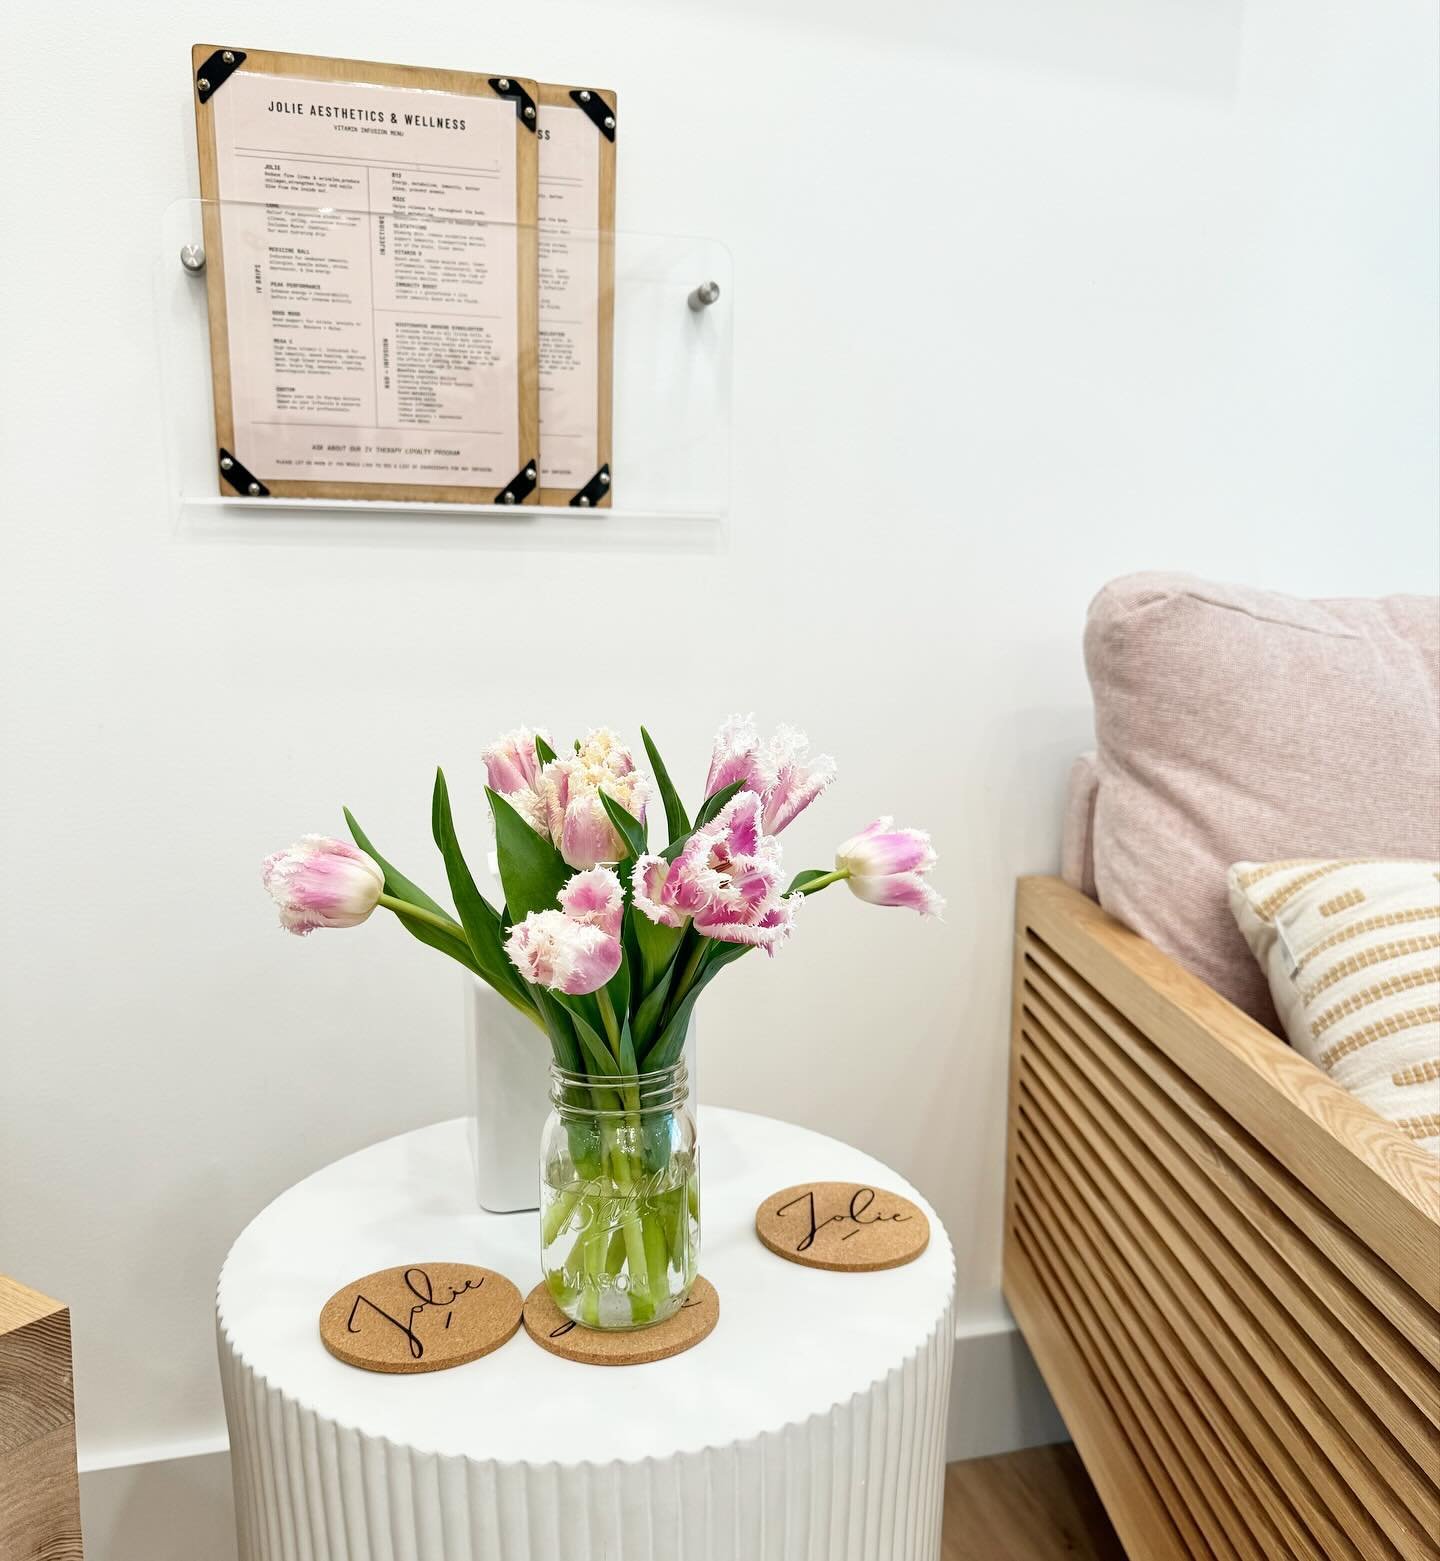 Struggling with the lasting effects of allergy season?
Drop by for a rejuvenating pick-me-up and a hydration boost. ✨

Indulge in snacks, cozy blankets, and beverages as you recharge with hydration and vital vitamins. ✨💧

Book an appointment!
- onli